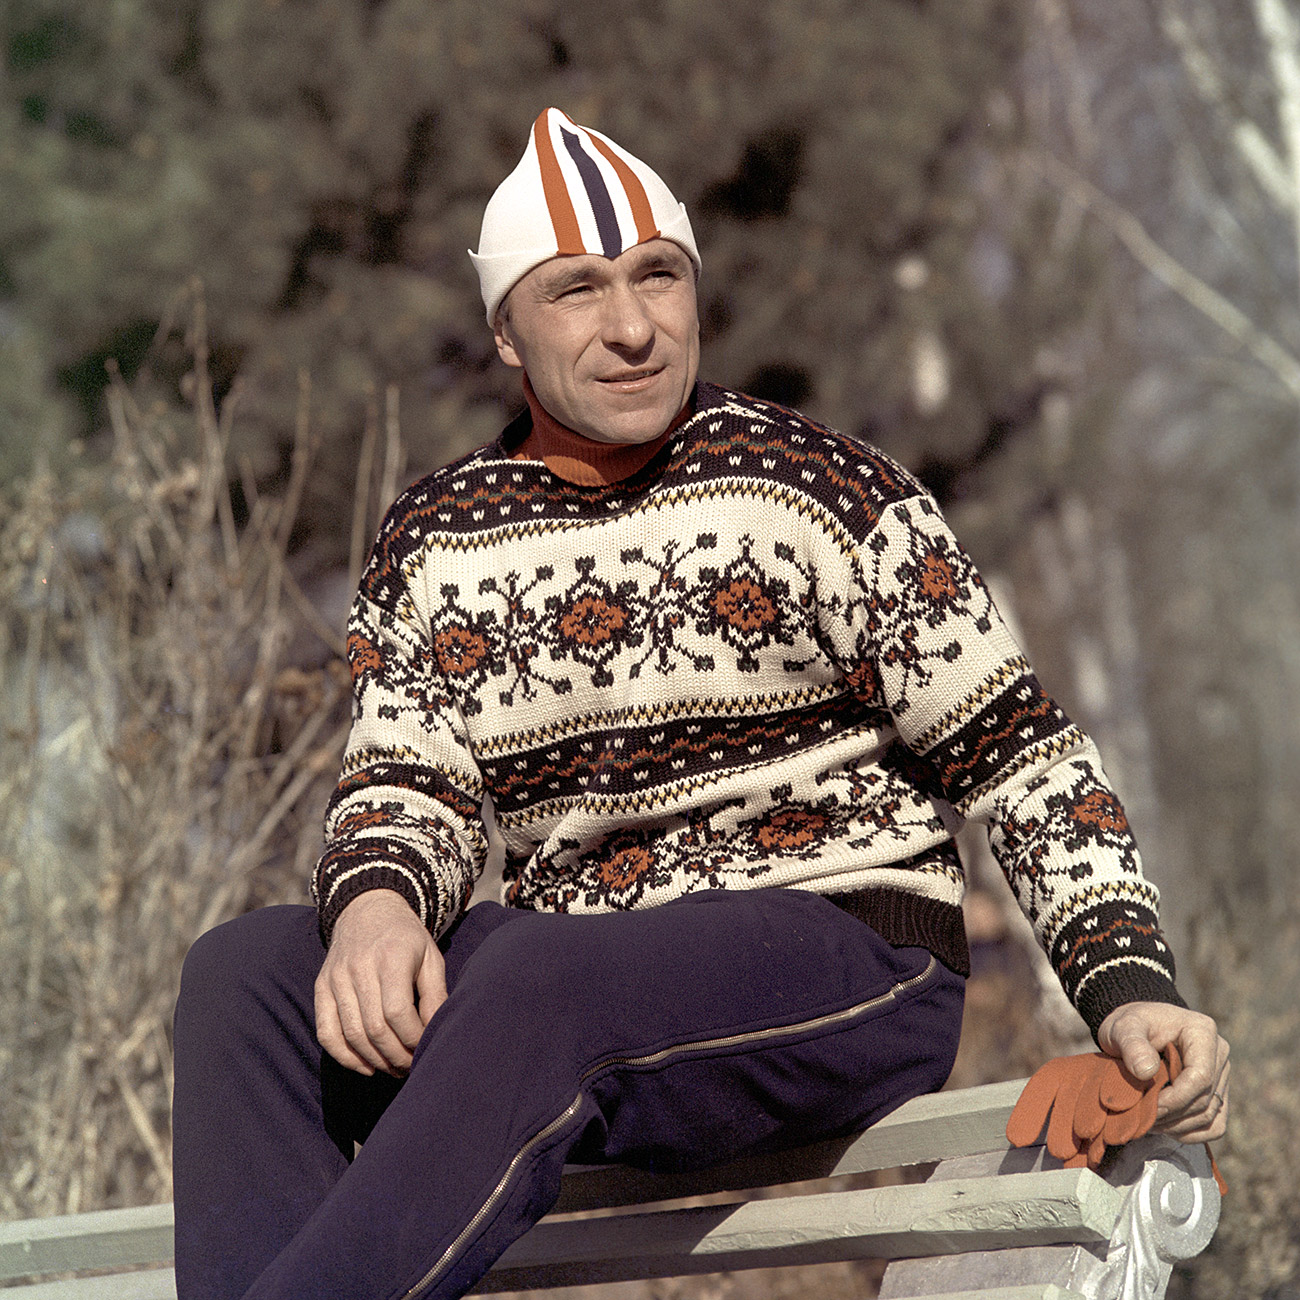 Yevgeny Grishin, Olympic champion in speed skating (1956 and 1960) in 500m and 1500m race. / Iosif Budnevich/RIA Novosti